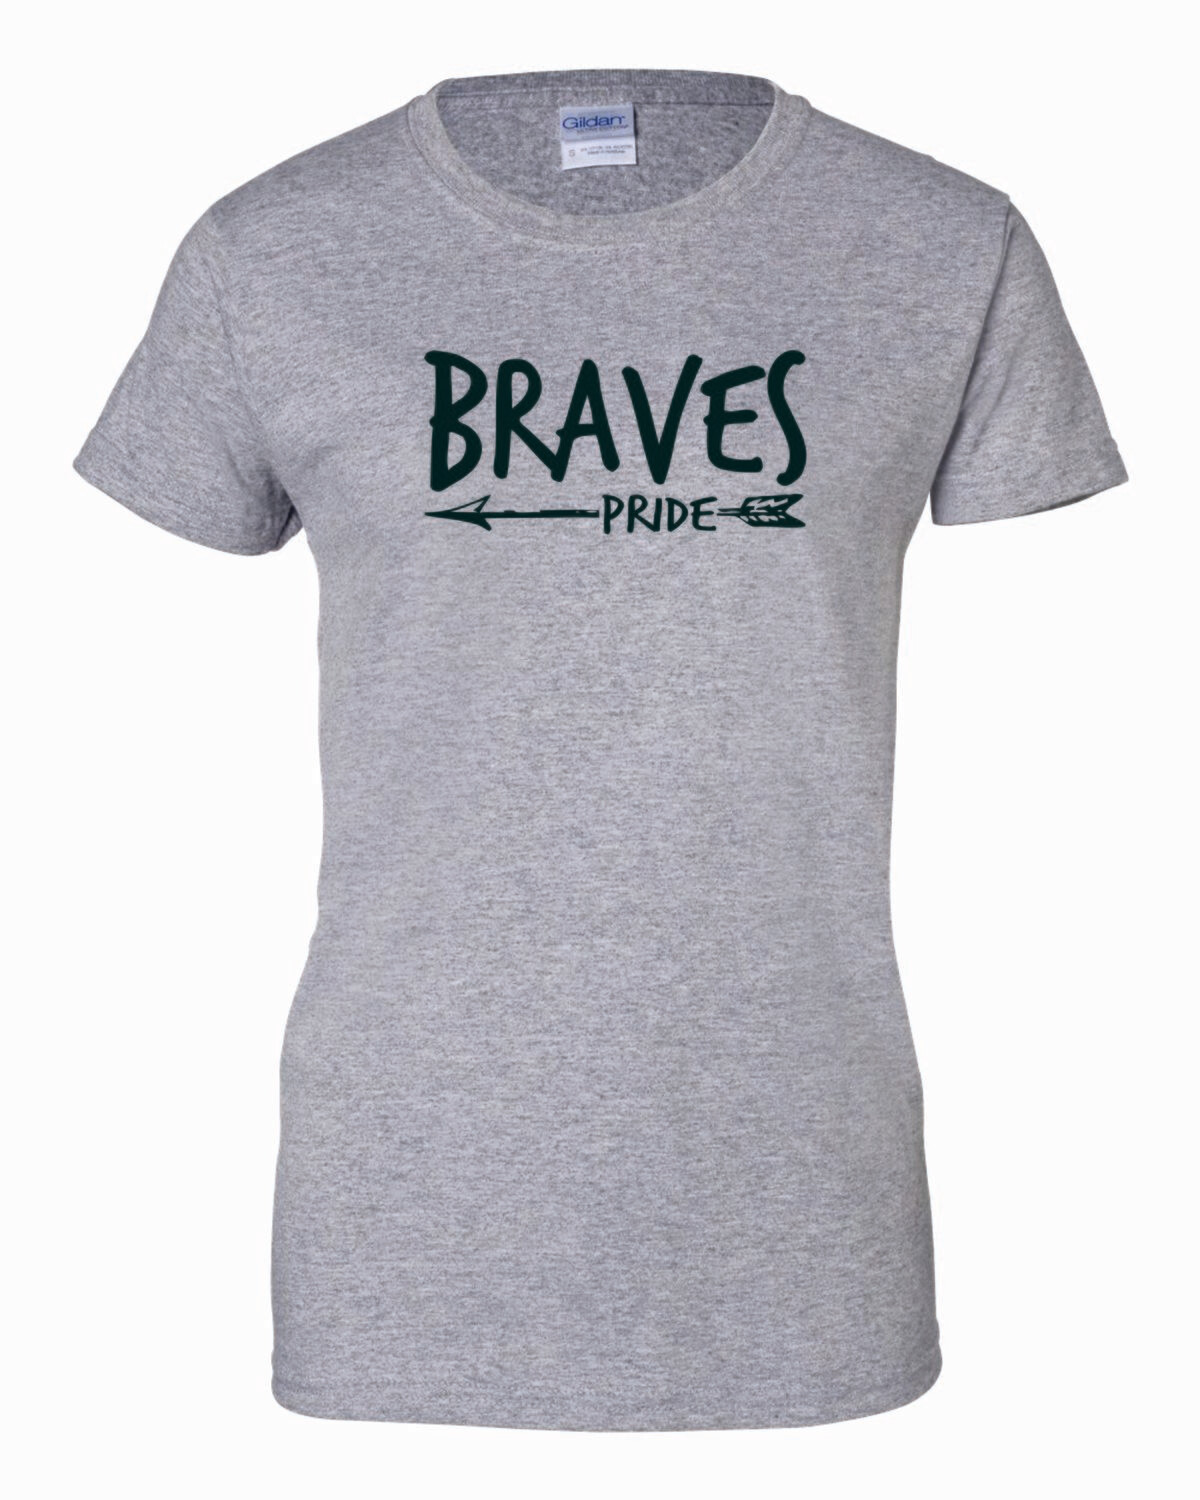 BRAVES PRIDE Women's T-shirt, 2 colors available